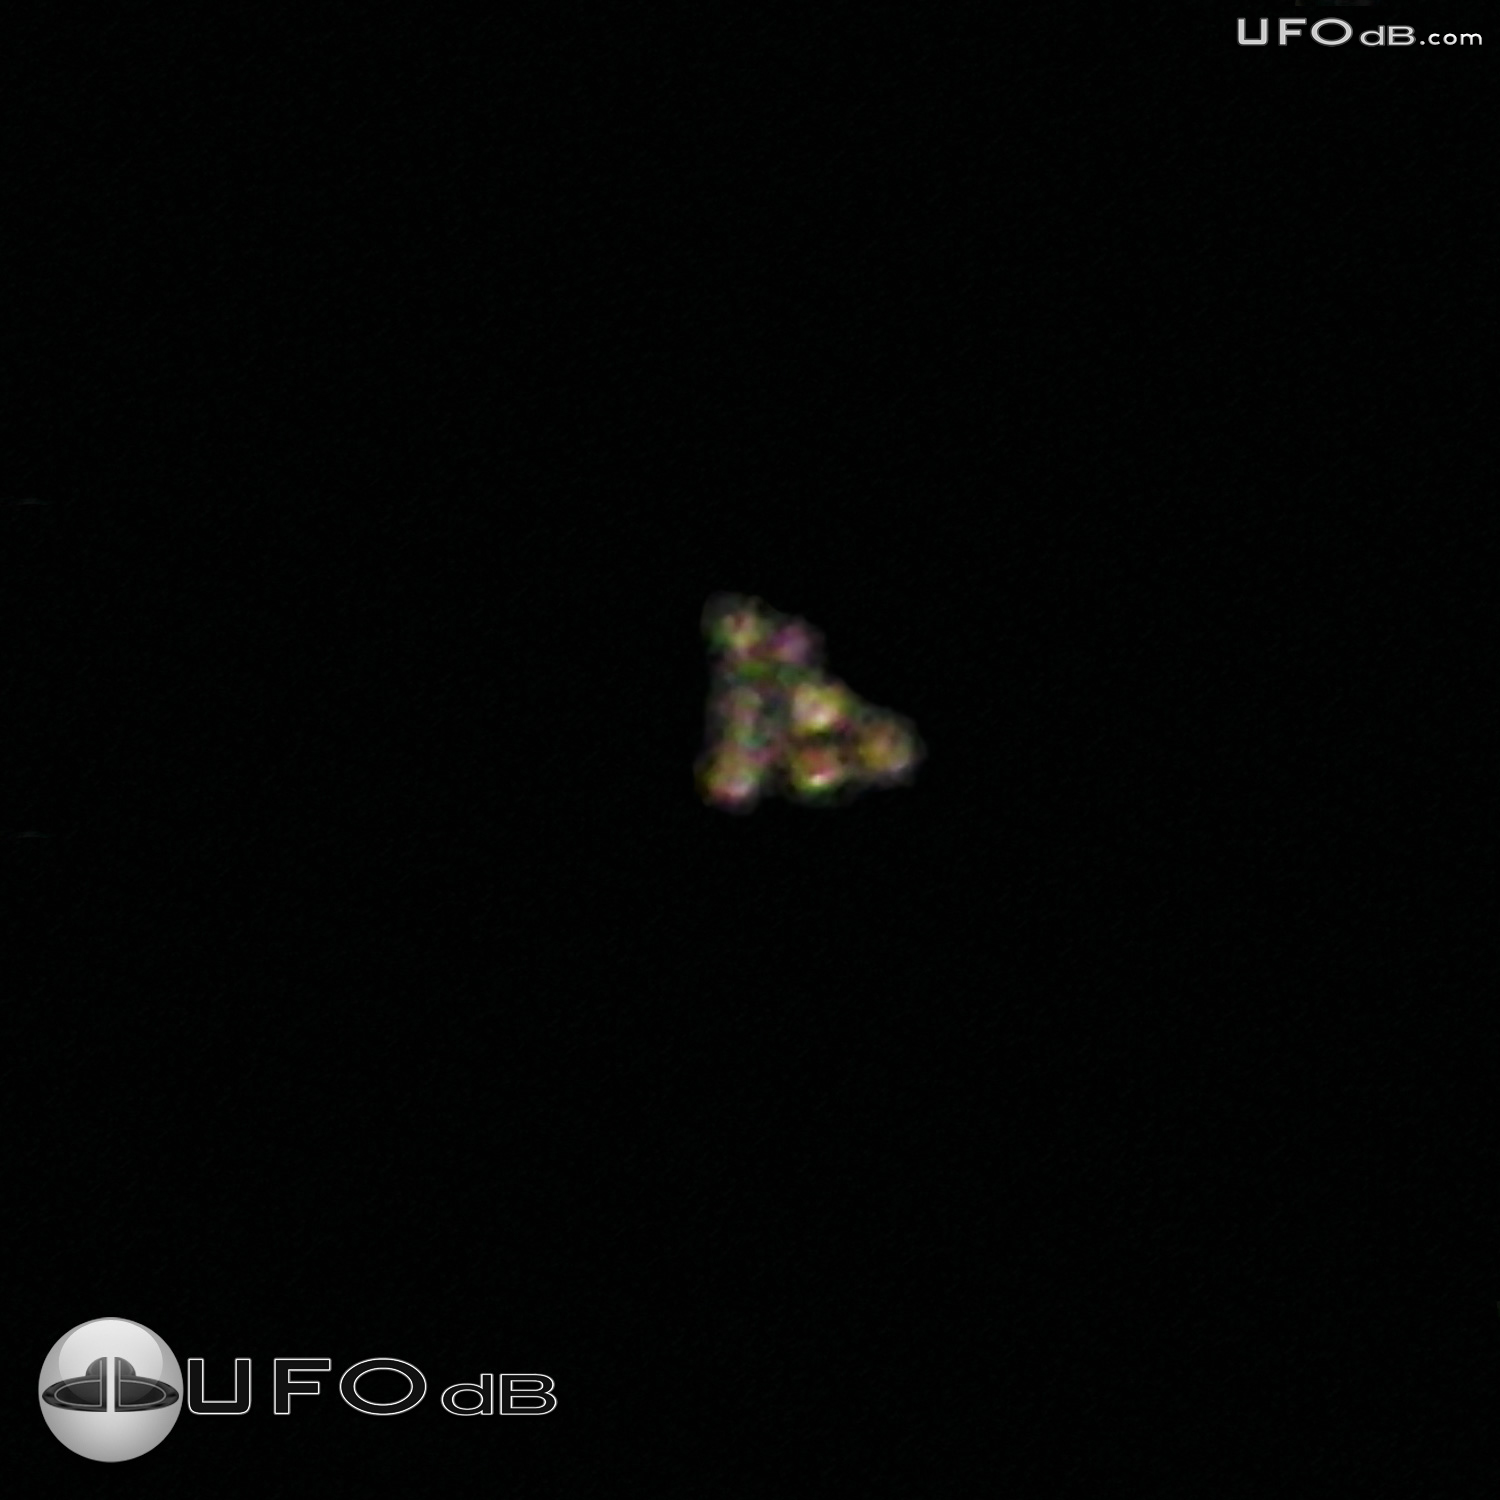 Santa Cruz mountains visited by a Triangular UFO | USA | May 9 2011 UFO Picture #291-1